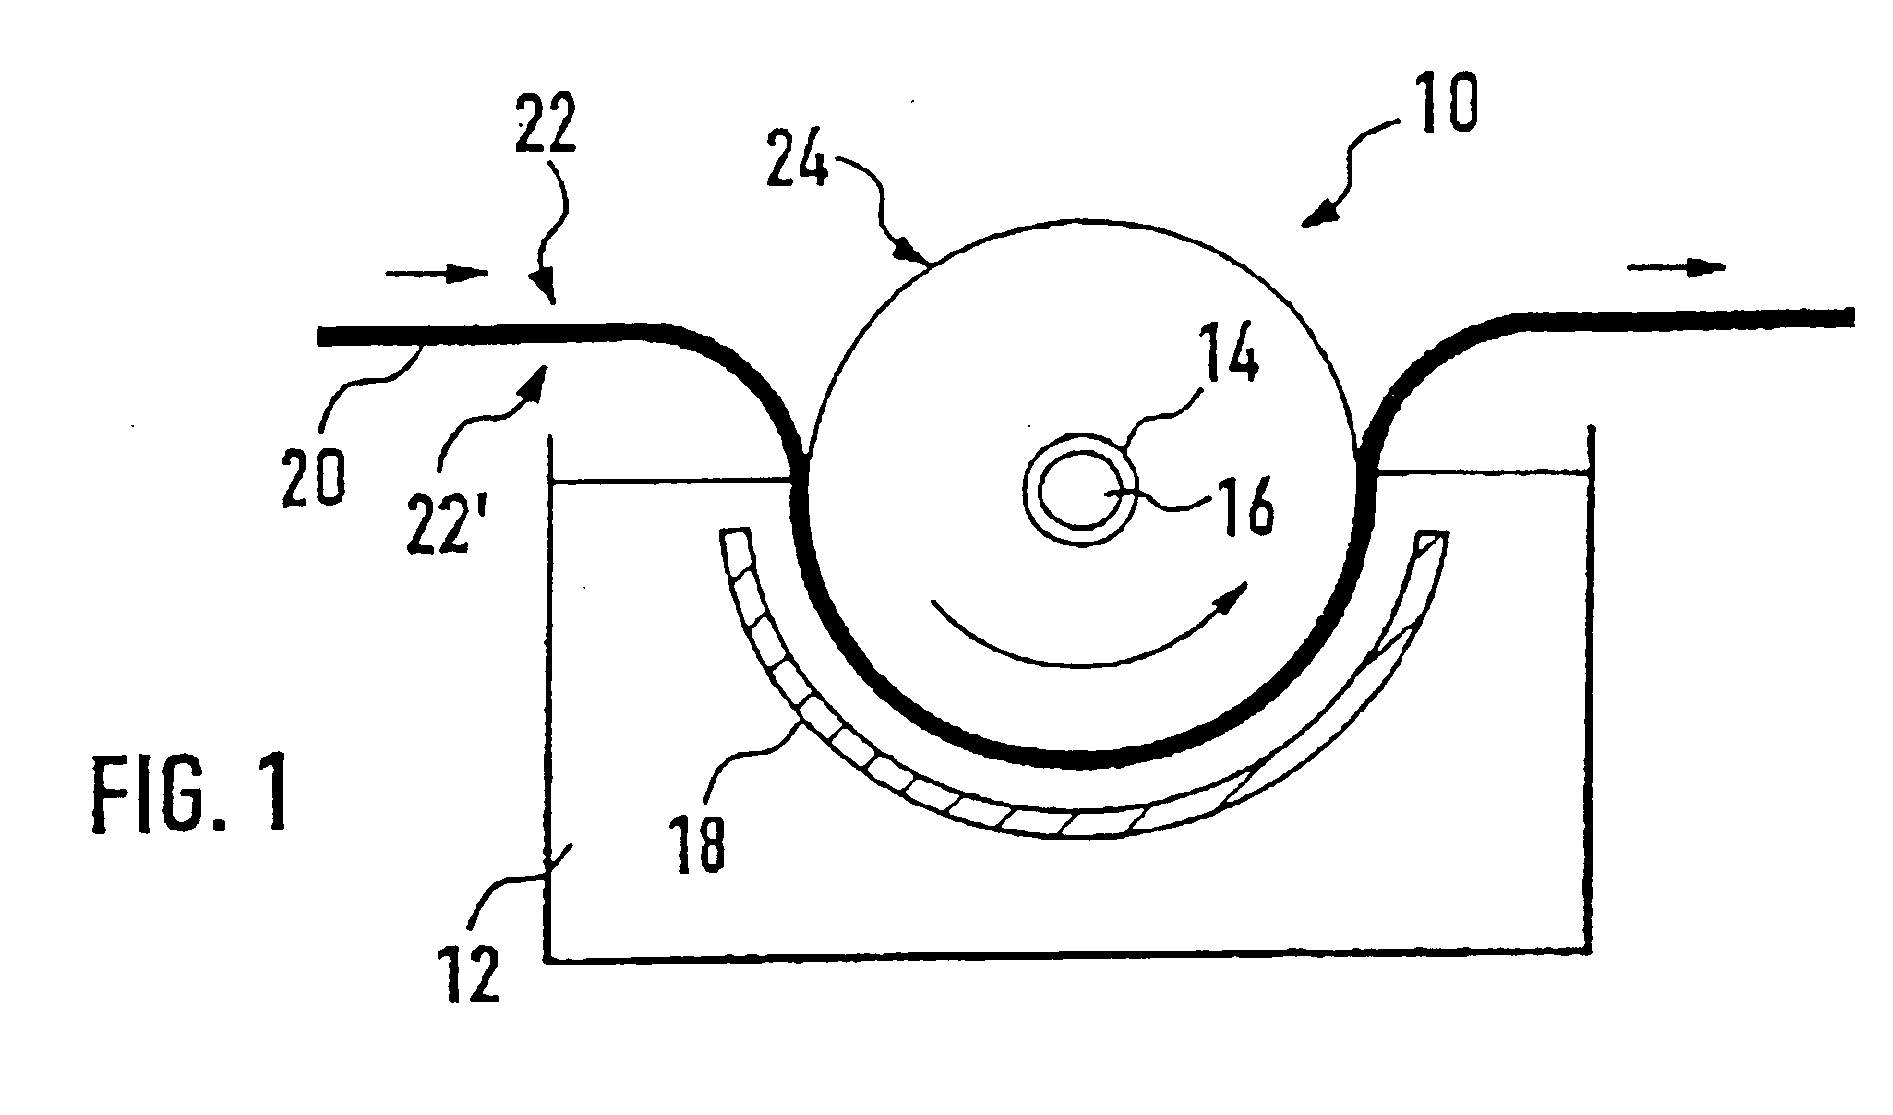 Method for electroplating a strip of foam